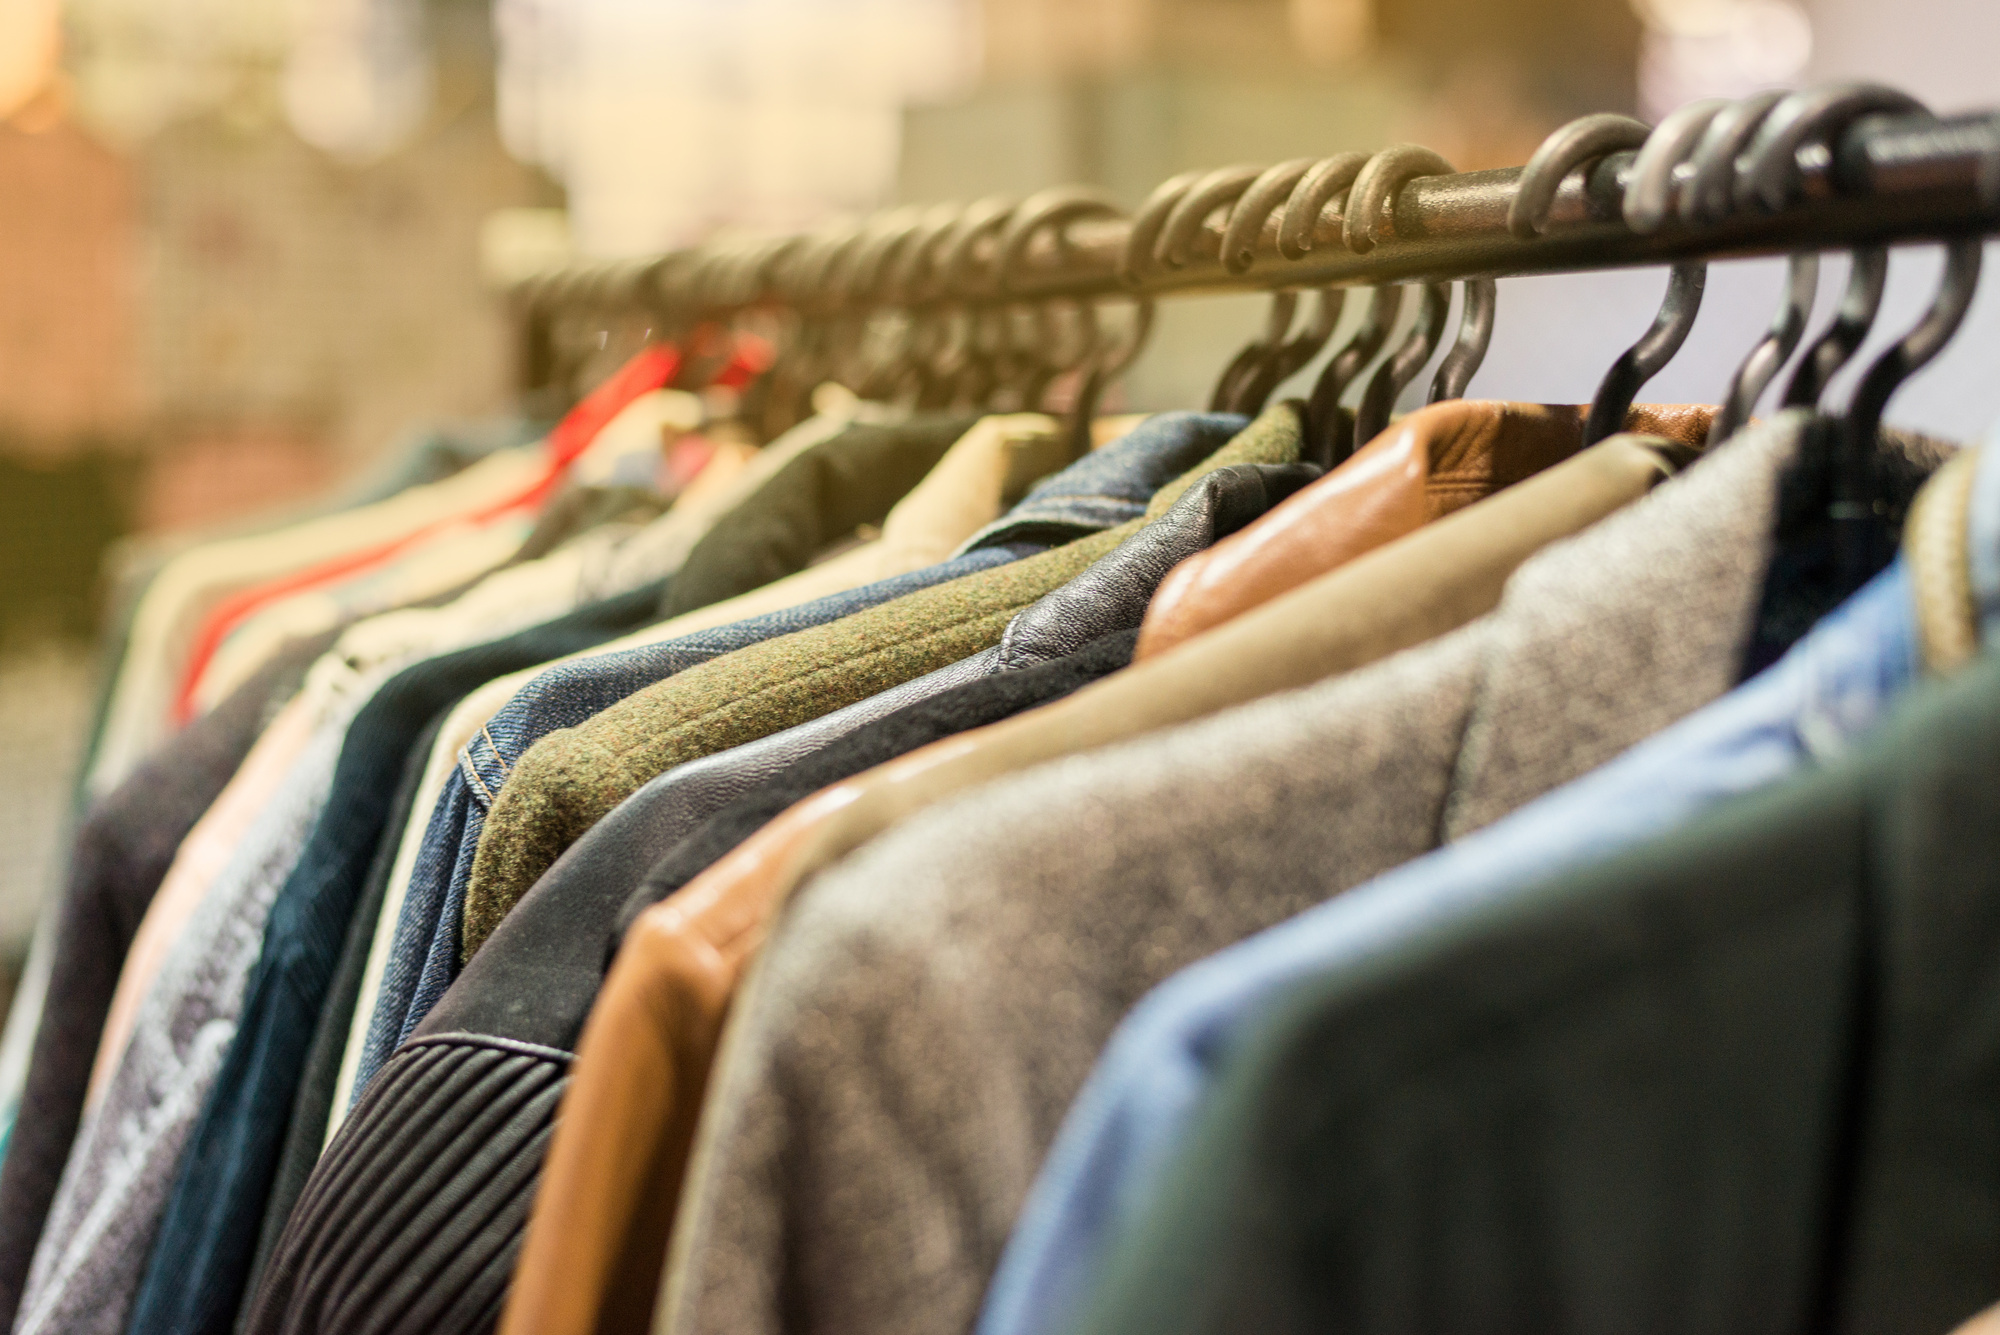 Top 10 Steaming Hot Tips to Find the Best Dry Cleaners - Lateet